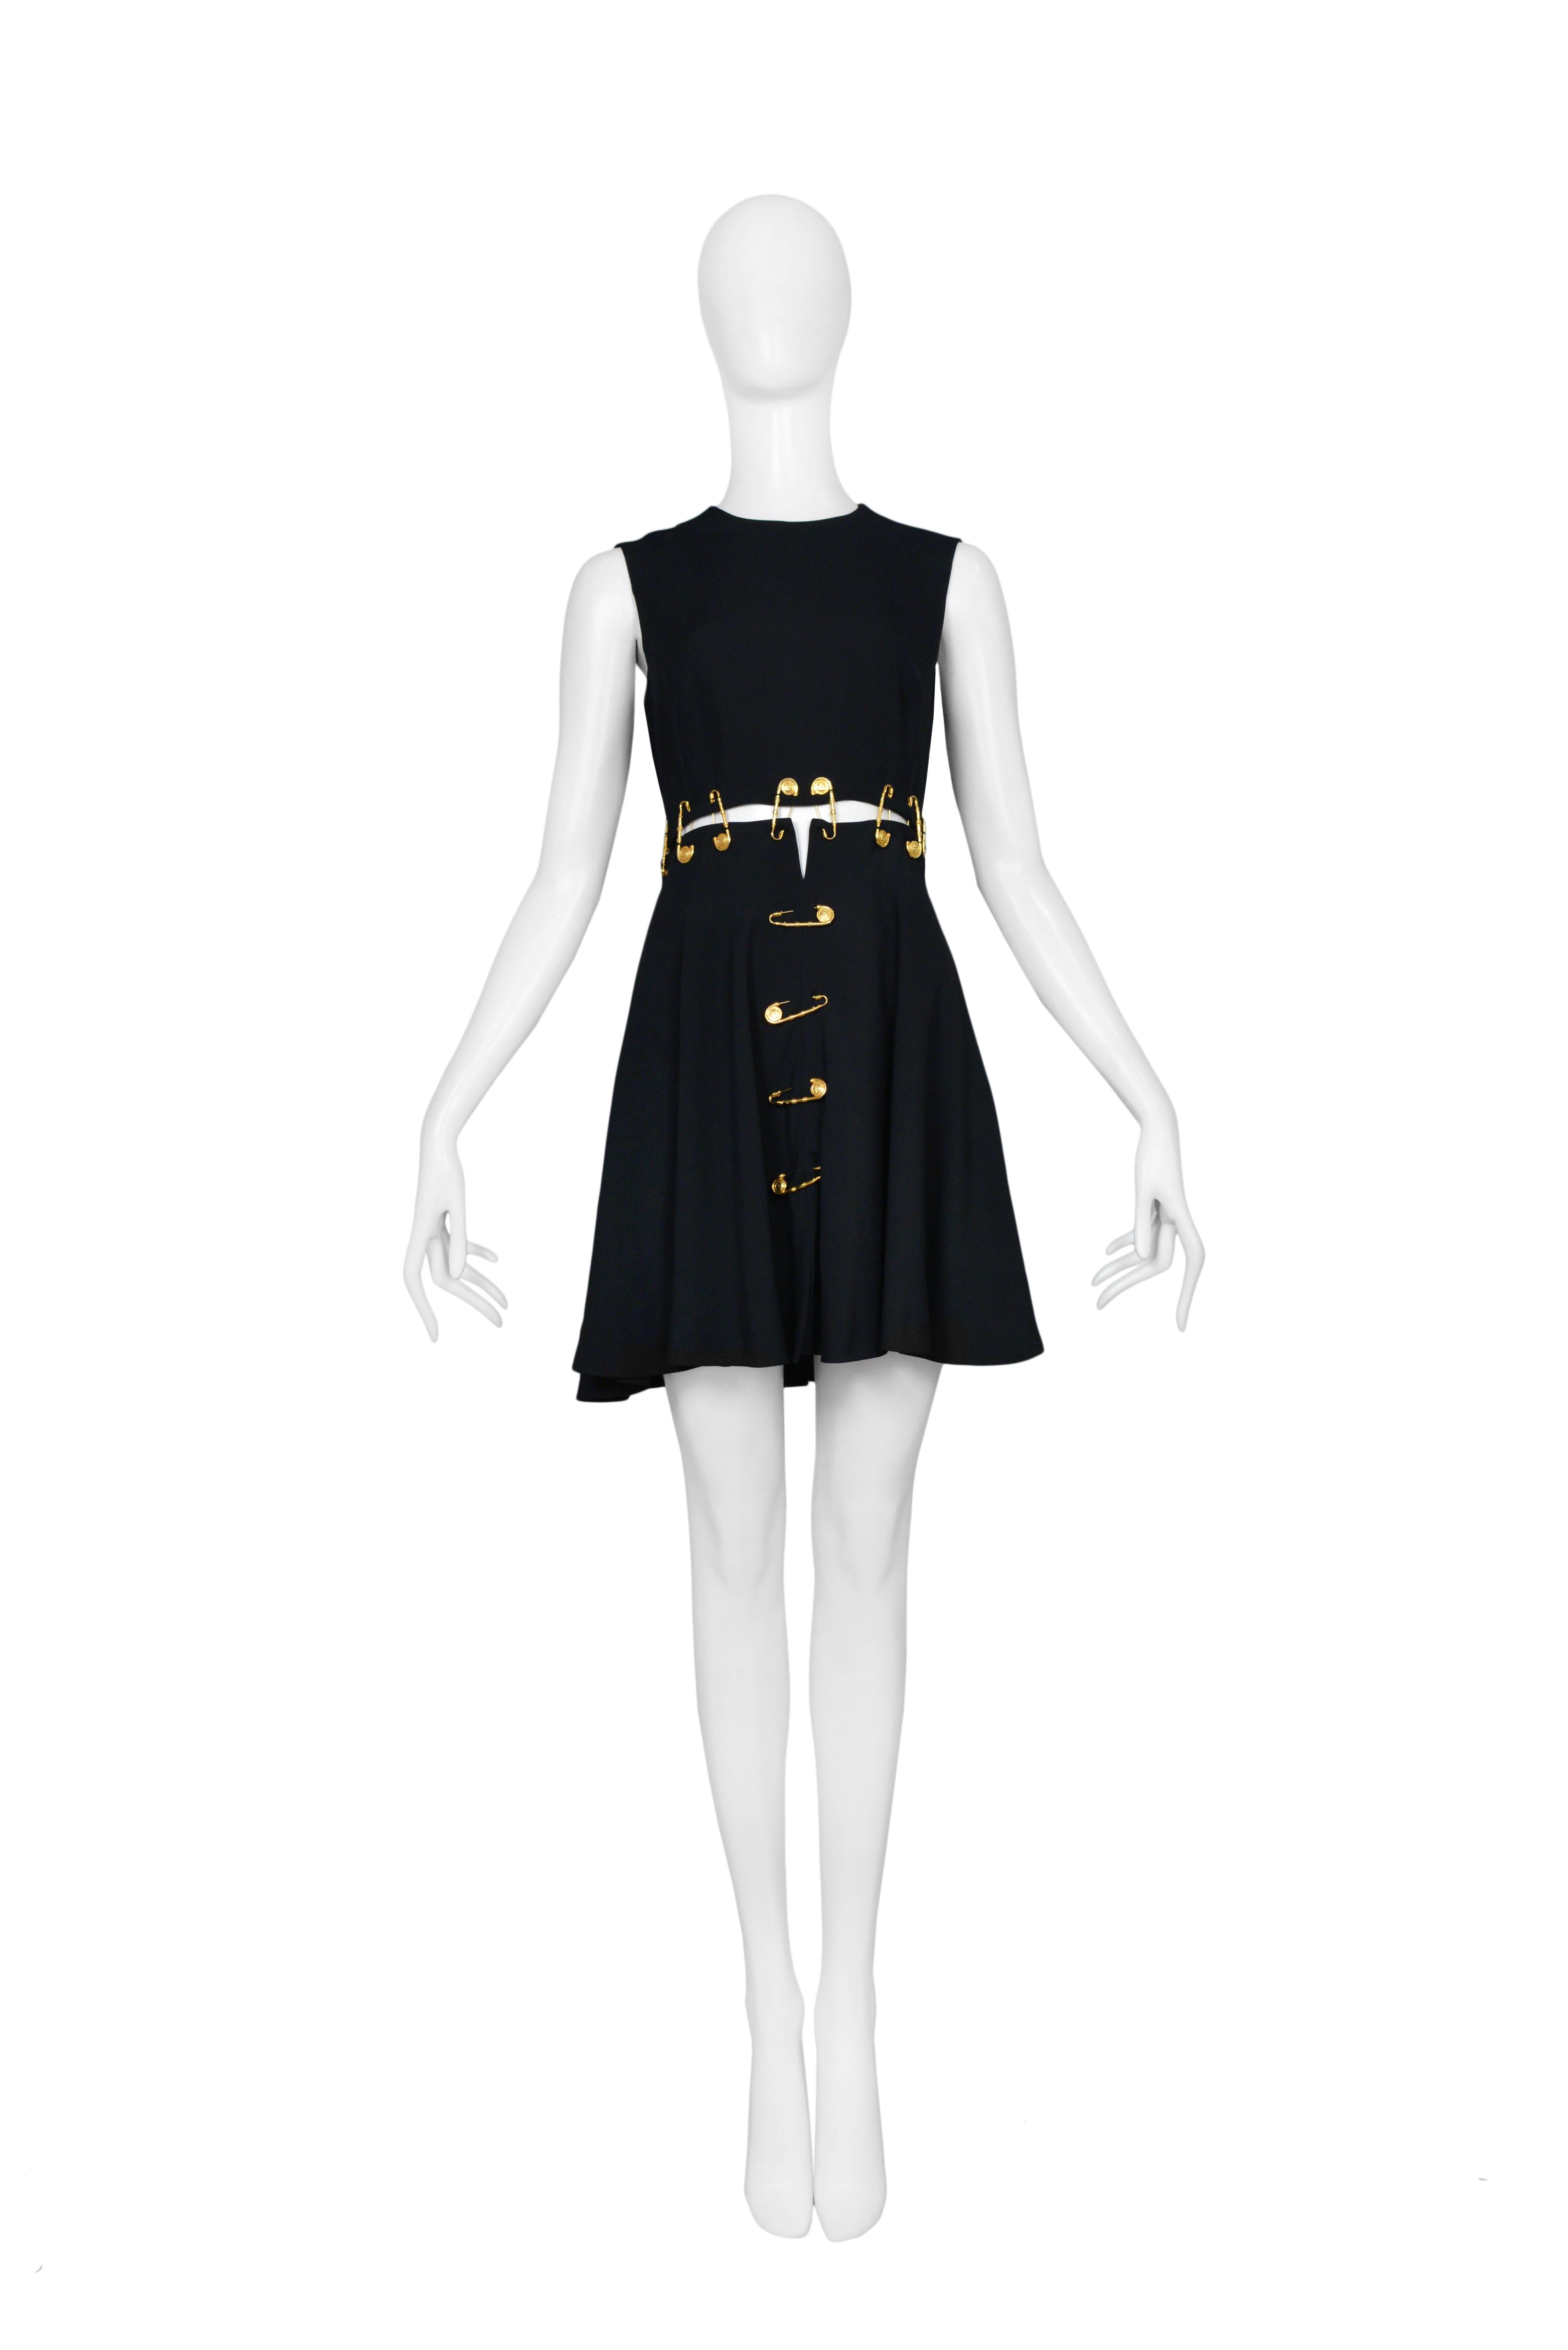 Important and rare vintage Gianni Versace black safety pin mini dress from 1994. The black sleeveless dress has open slits at waist line, center front and center back seams that are closed and decorated by large Versace gold tone safety pins.